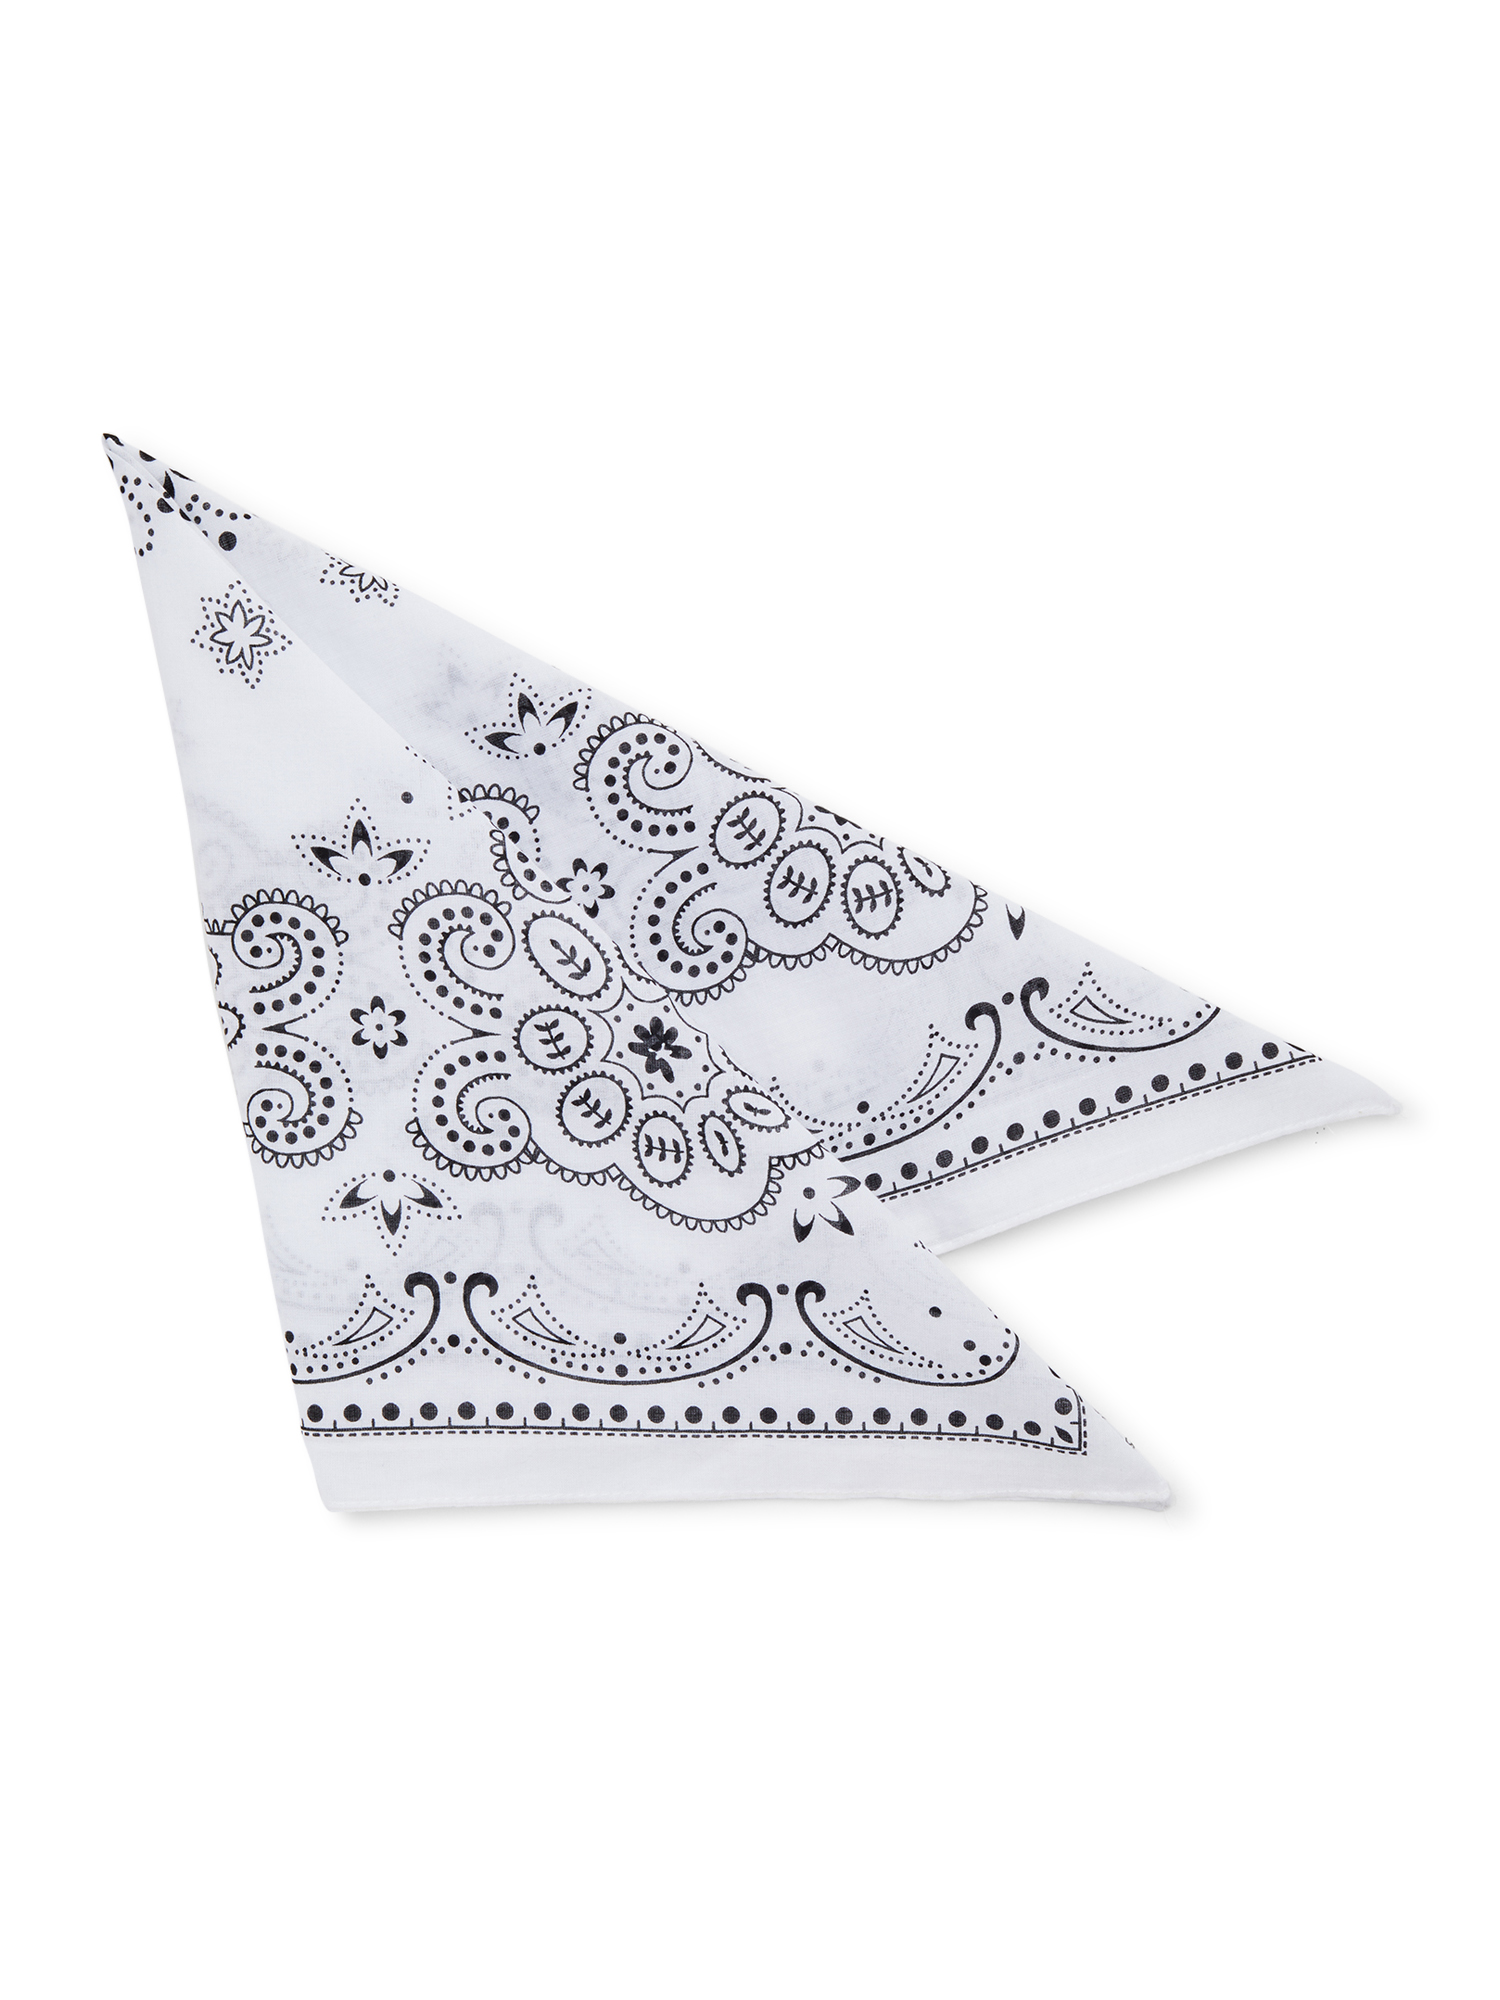 Time and Tru Women's Western Star Bandana Arctic White Black Soot - image 2 of 2